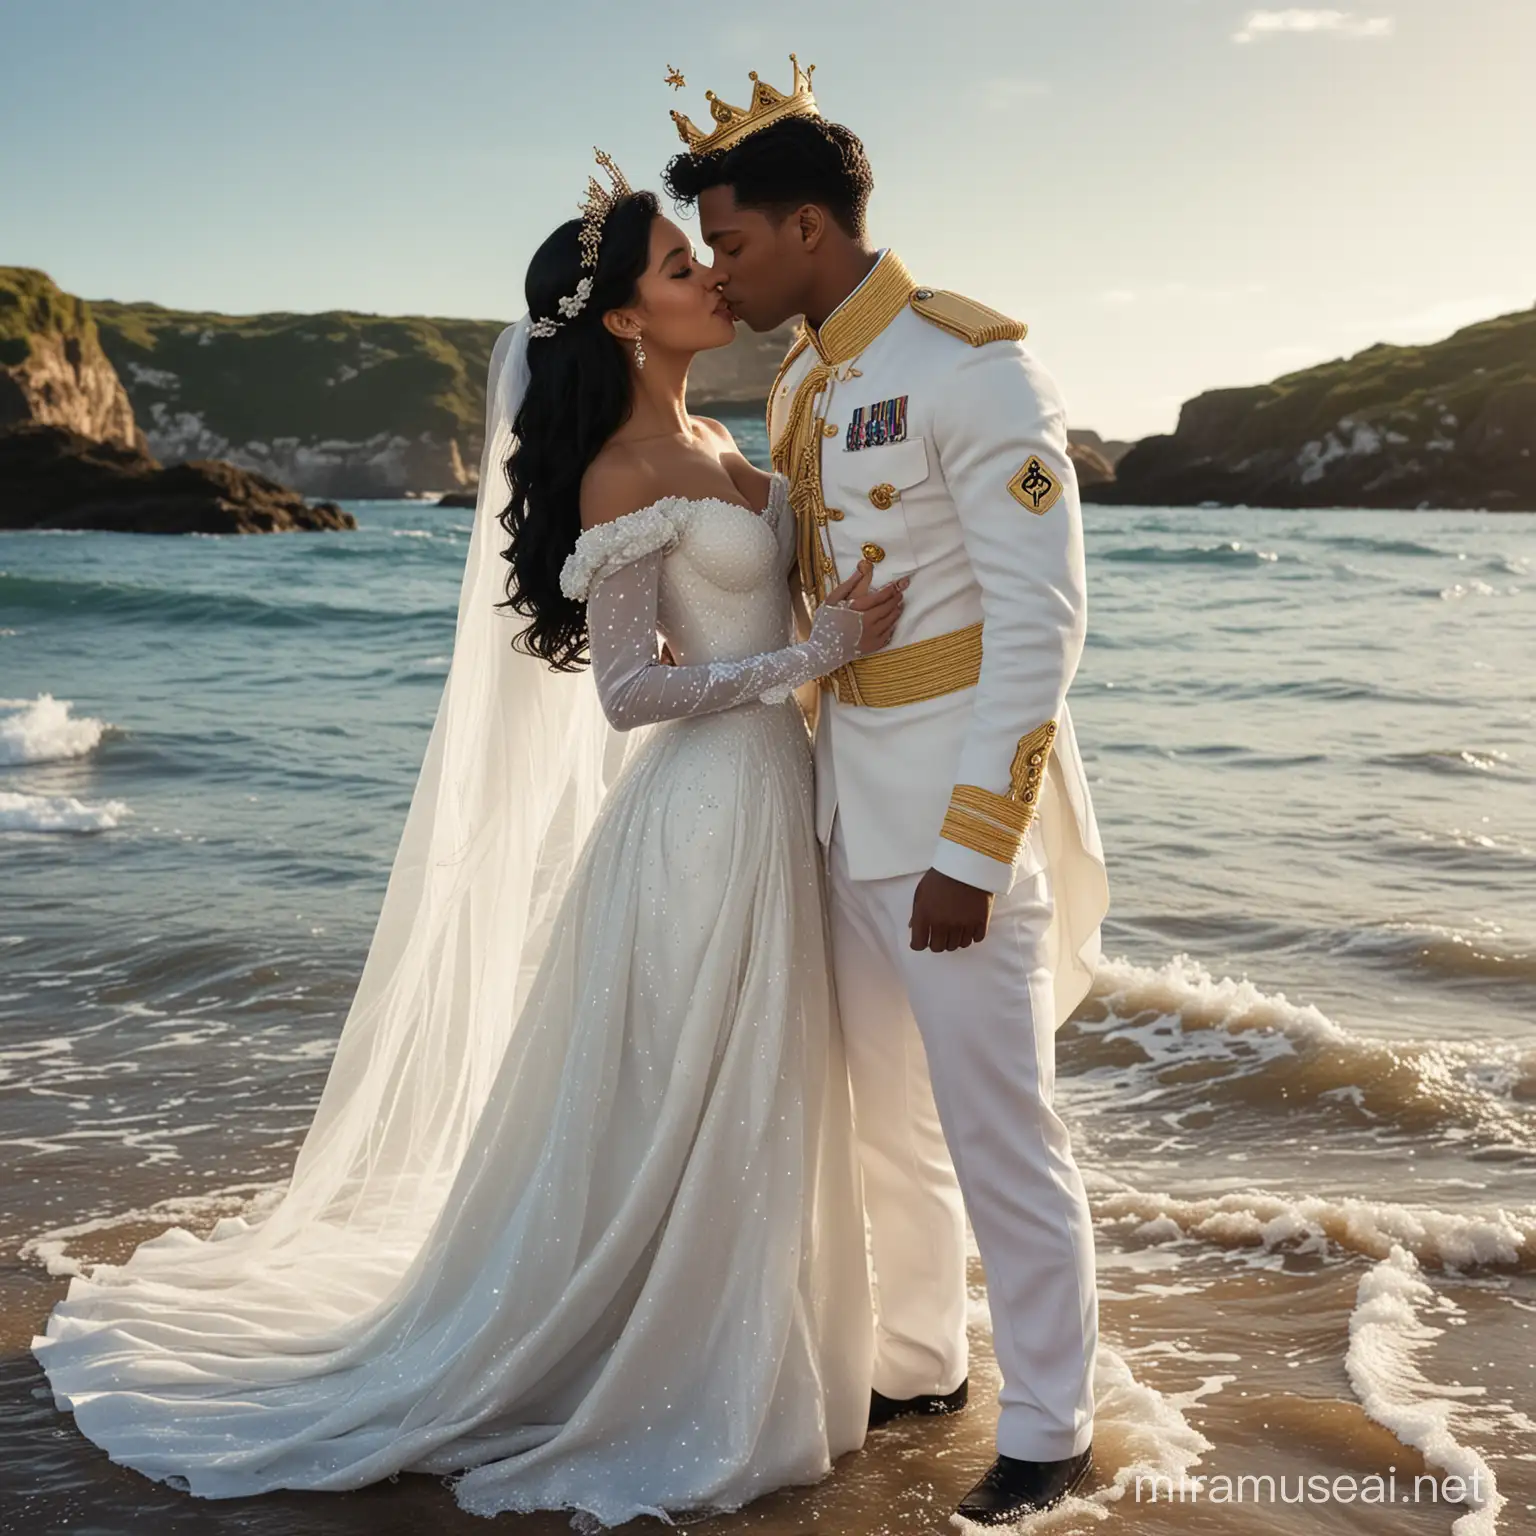 in a sea natural background there are prince Elijah is American 25-year-old with short black hair and white black hair short prince 25-year-old Elijah with white jacket and blue dark trousers,uniform of the British navy long-hair black girl with fairytail beautiful  Long wedding dress glitter with veil and princess crown, kissing in the  mouth, surrounded by natural sea beachshirt and  and princess disney ariel is 20-year-old British girl and jet black long hair and, kissing  face 8k resolution